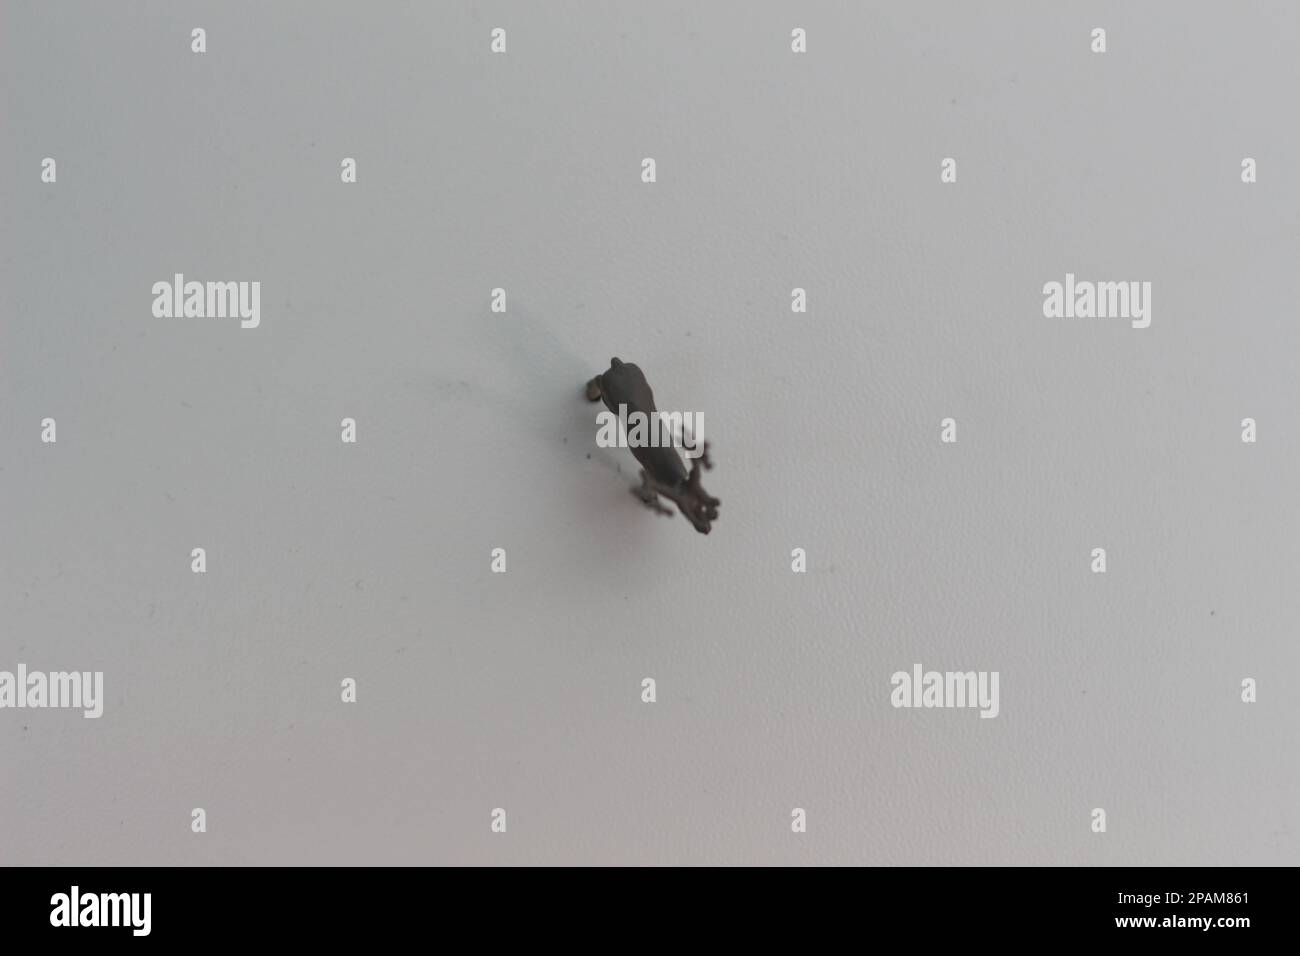 a close up of a miniature figure of a moose isolated on a white background. Miniature figure photo concept. Stock Photo